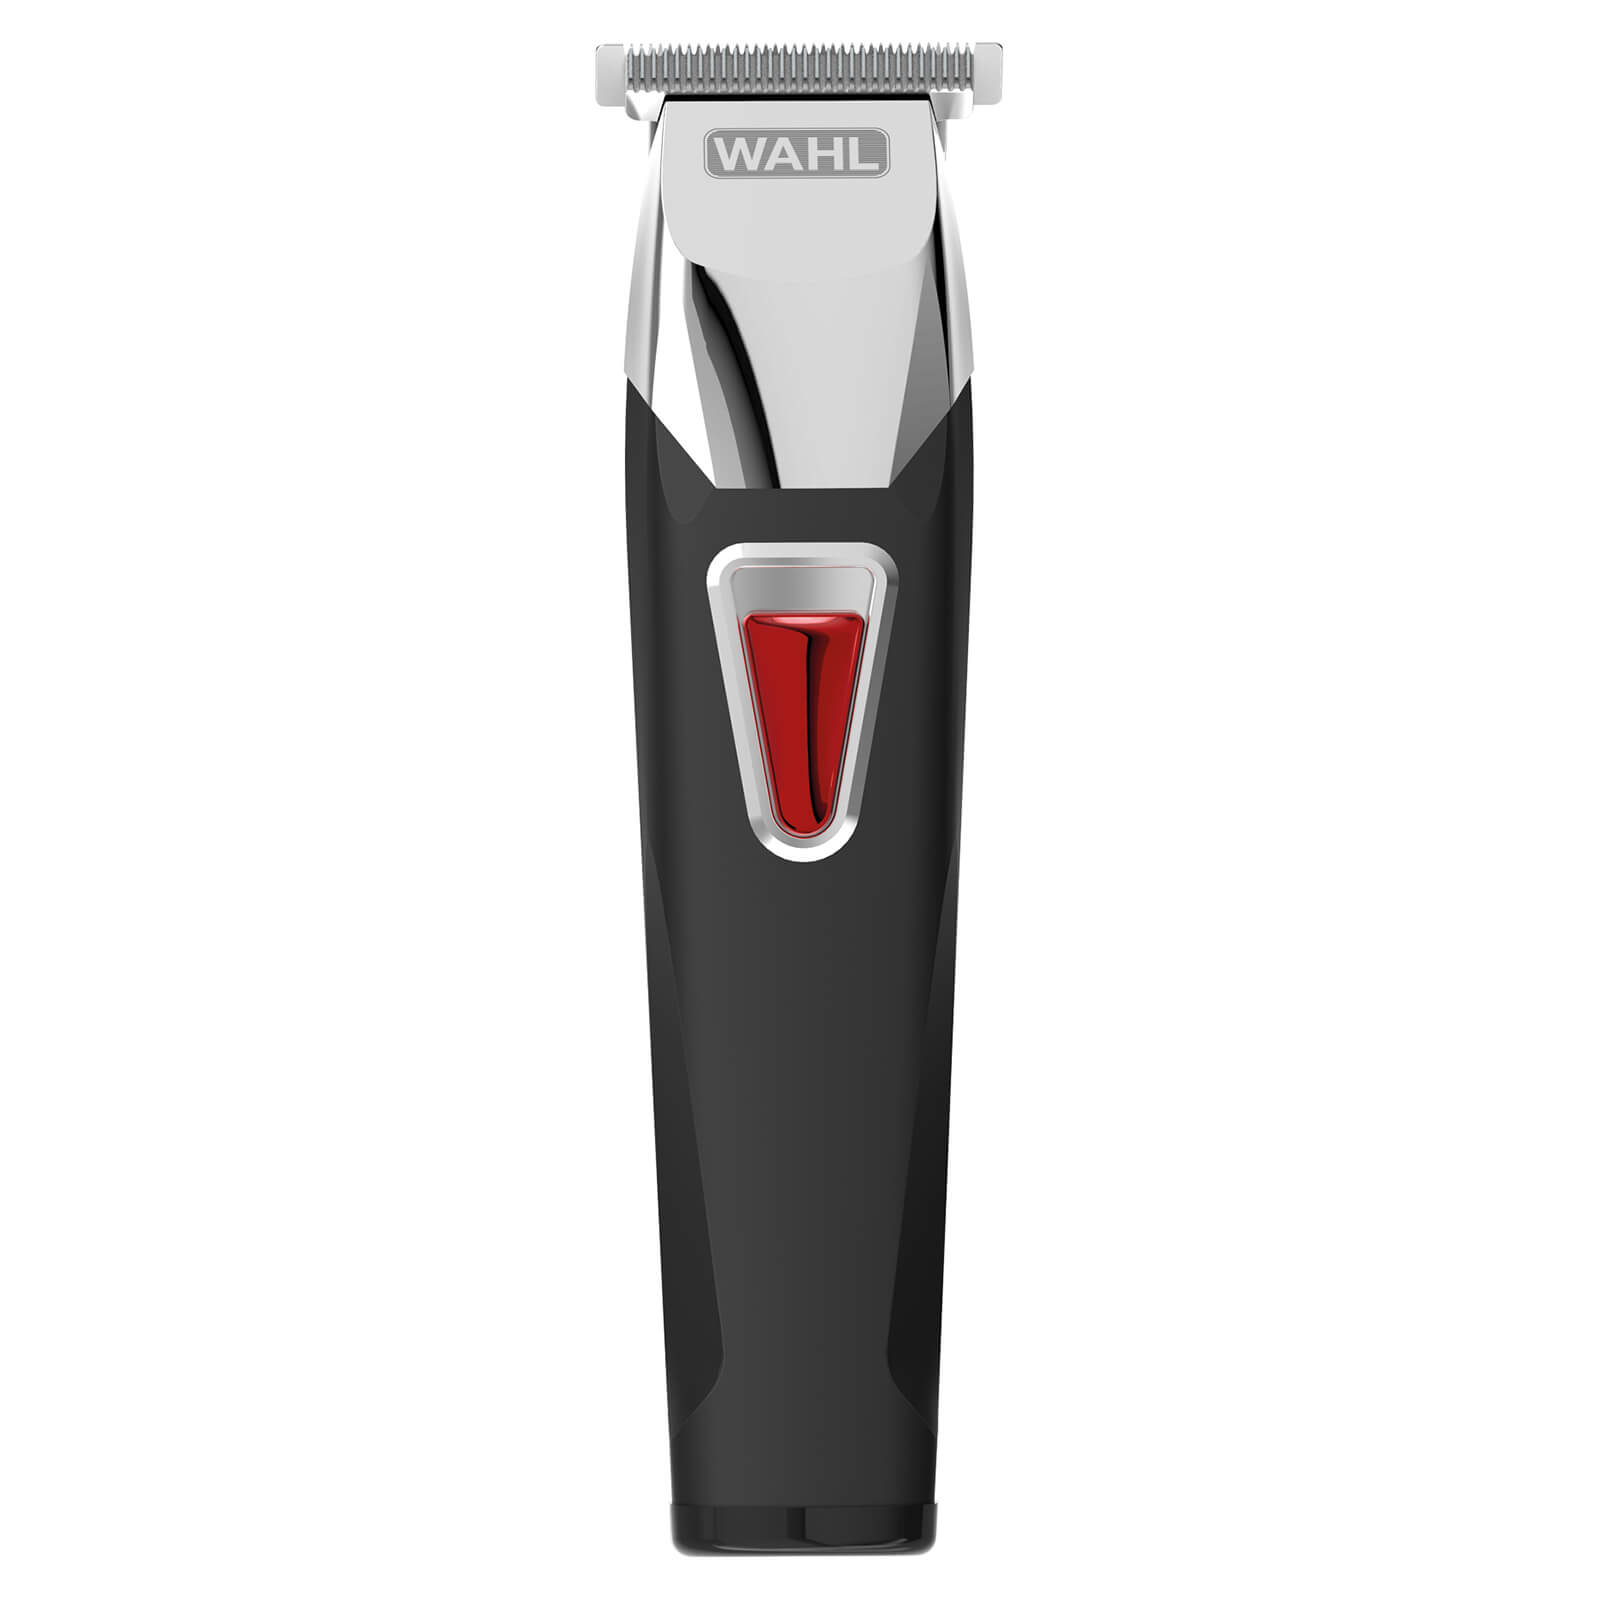 Wahl T-Pro Cordless Trimmer